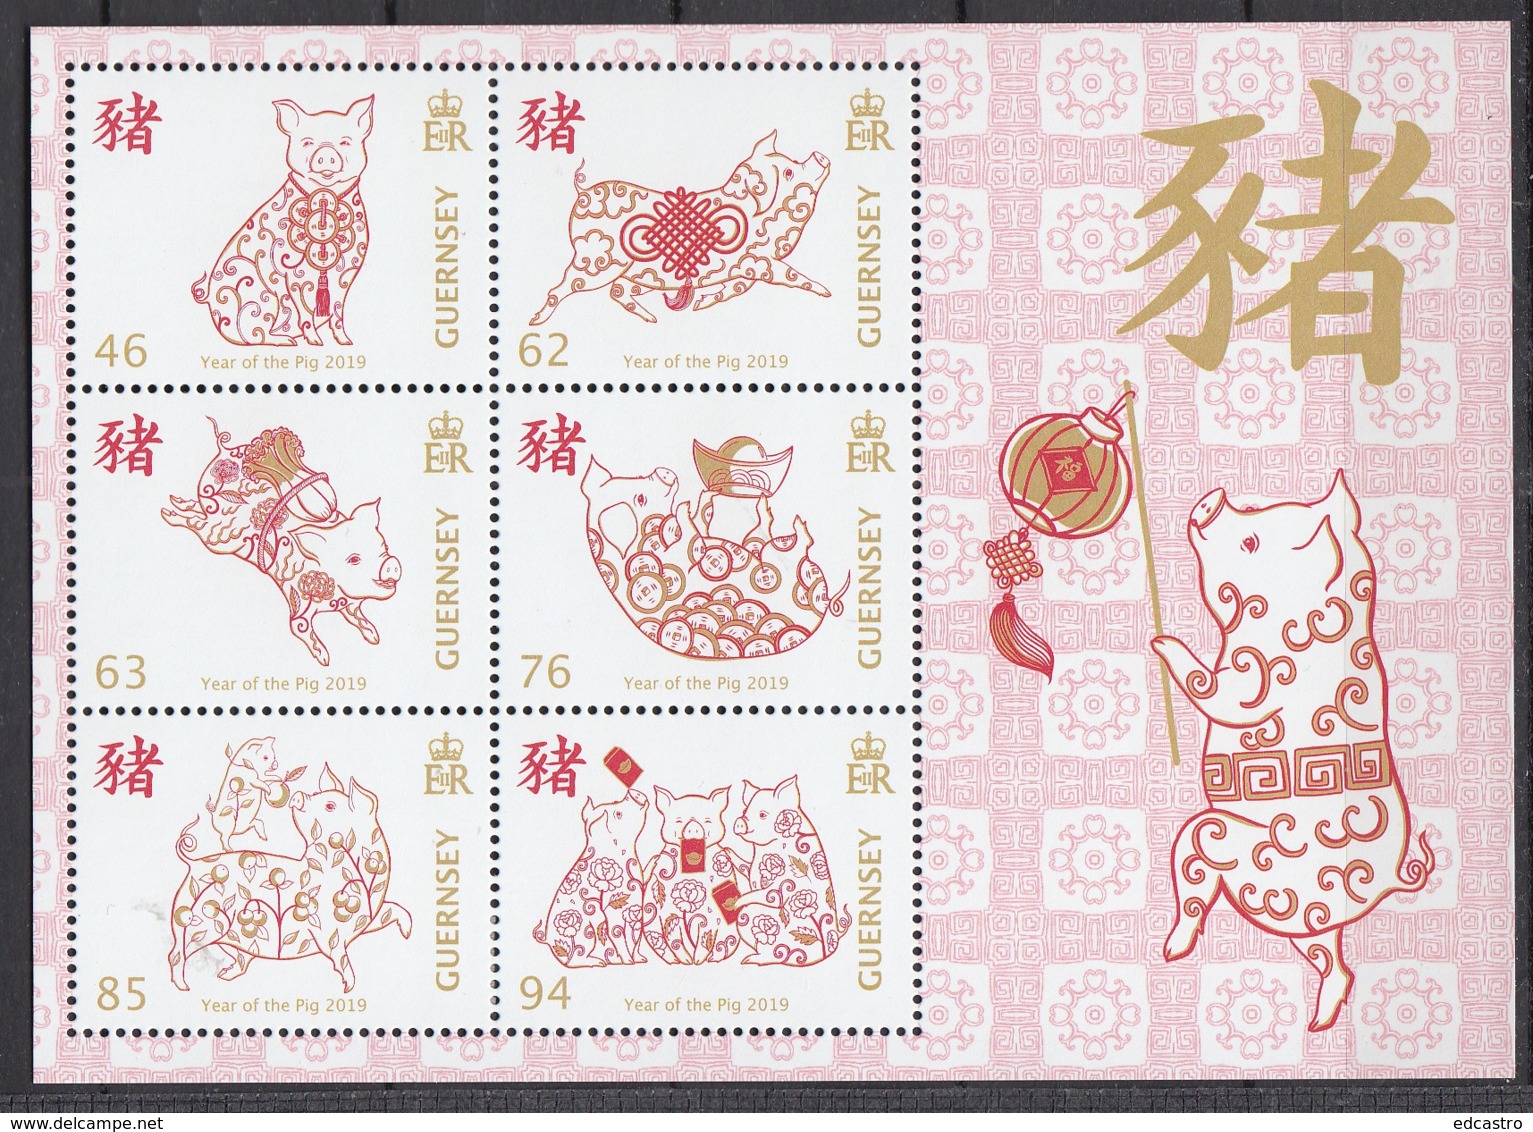 1.- GUERNSEY 2019 The Year Of The Pig (Miniature Sheet) - Guernsey